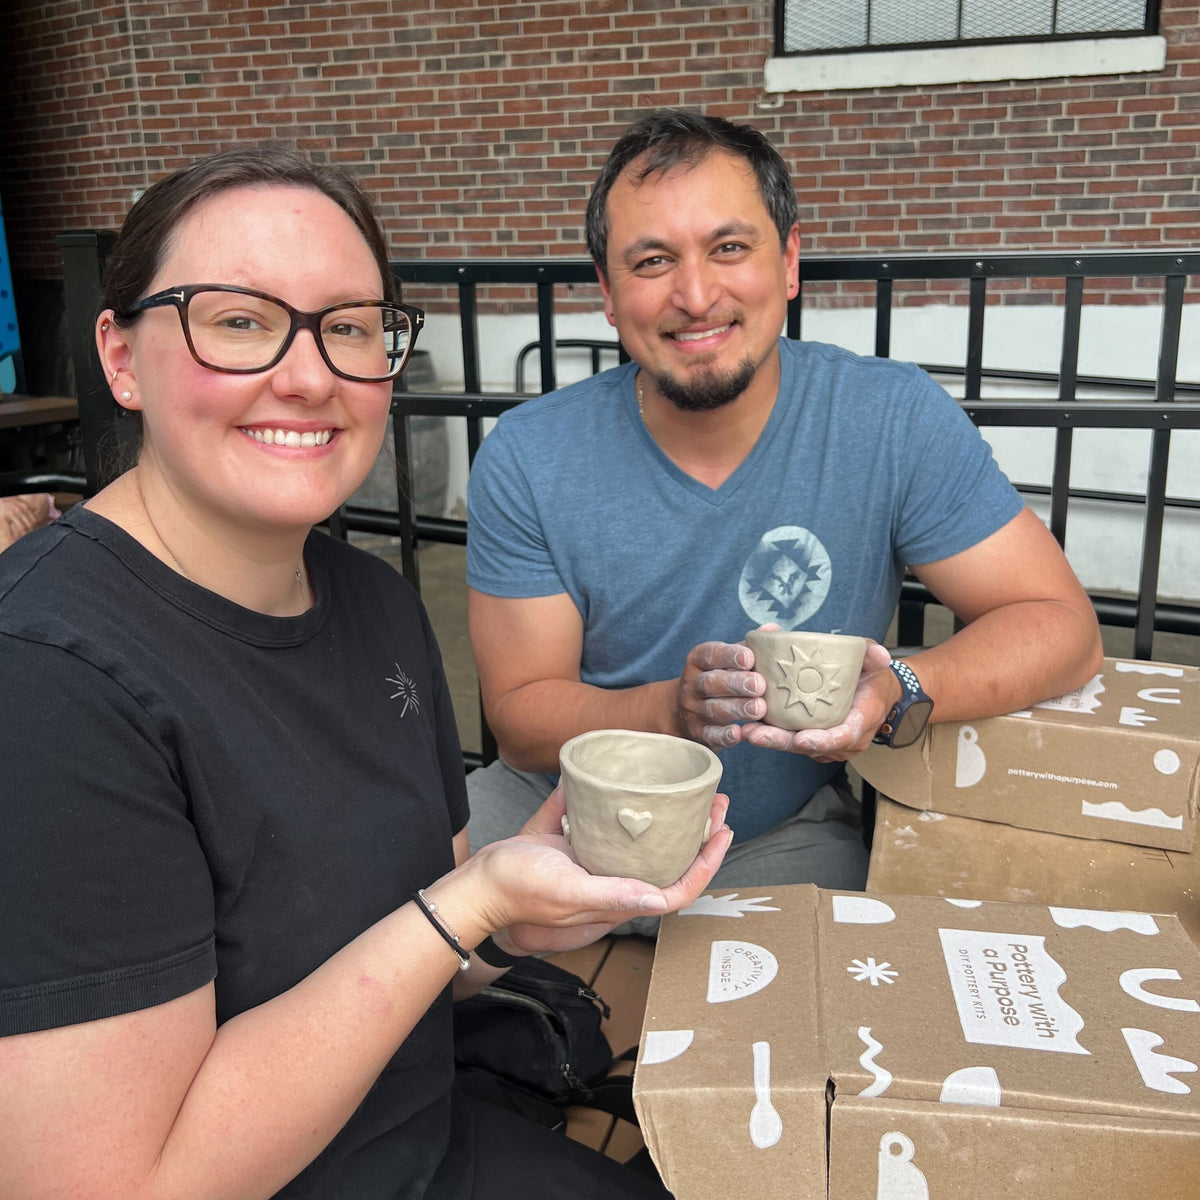 Clay Mug Making Pottery Class — 7/14 &amp; 8/8 (Colleen’s, Medford MA)